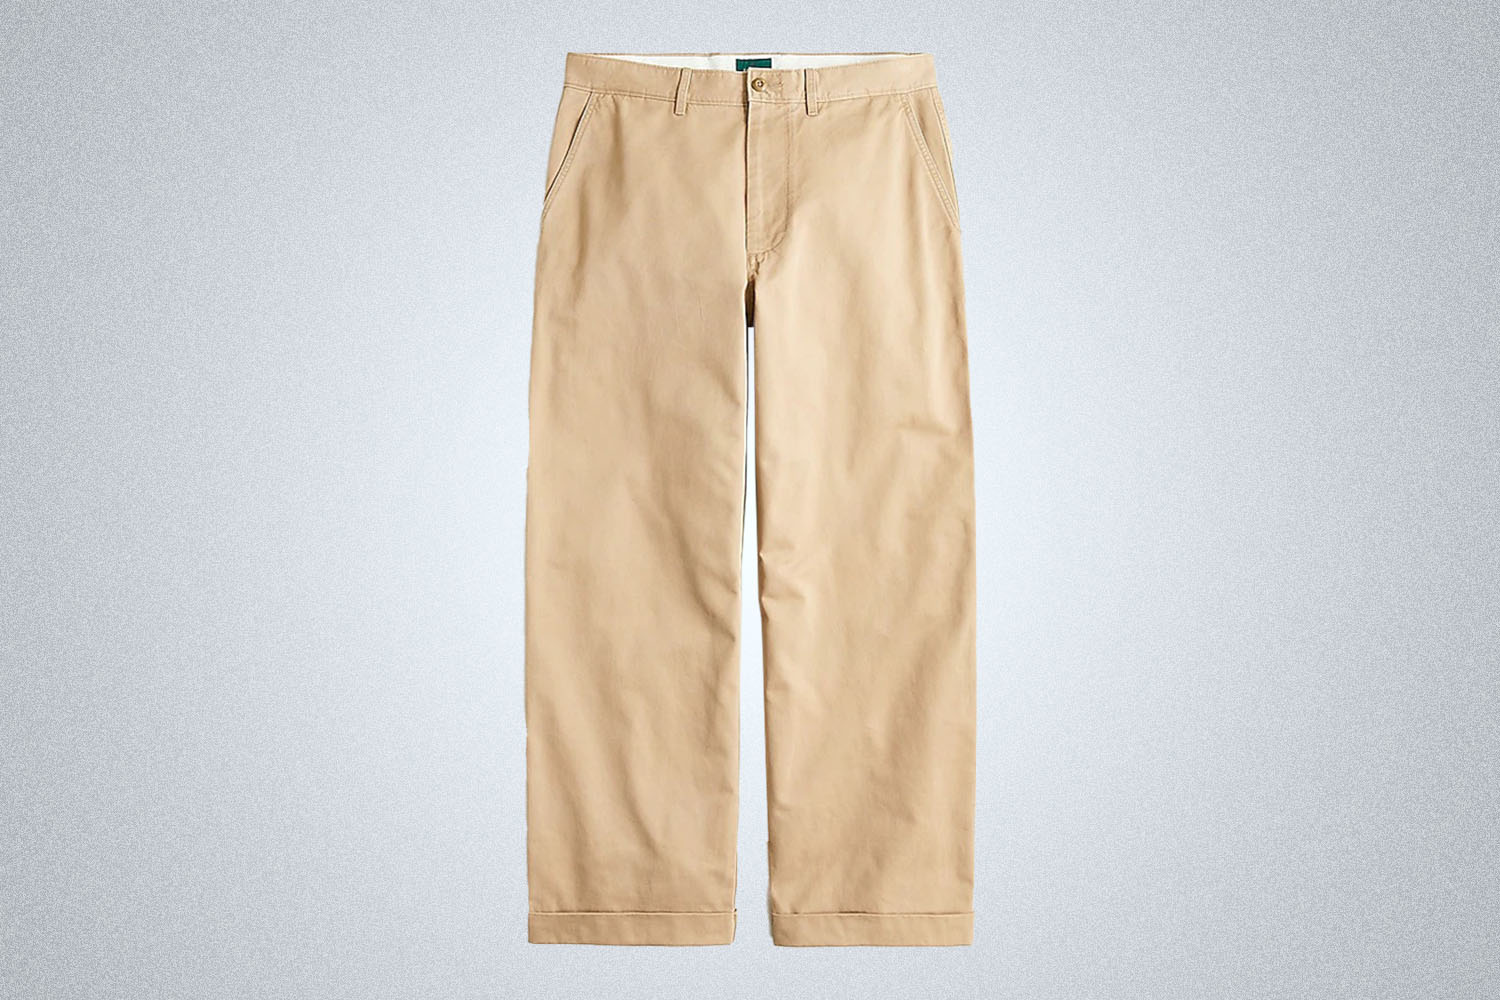 a pair of tan J.Crew chinos on a grey background